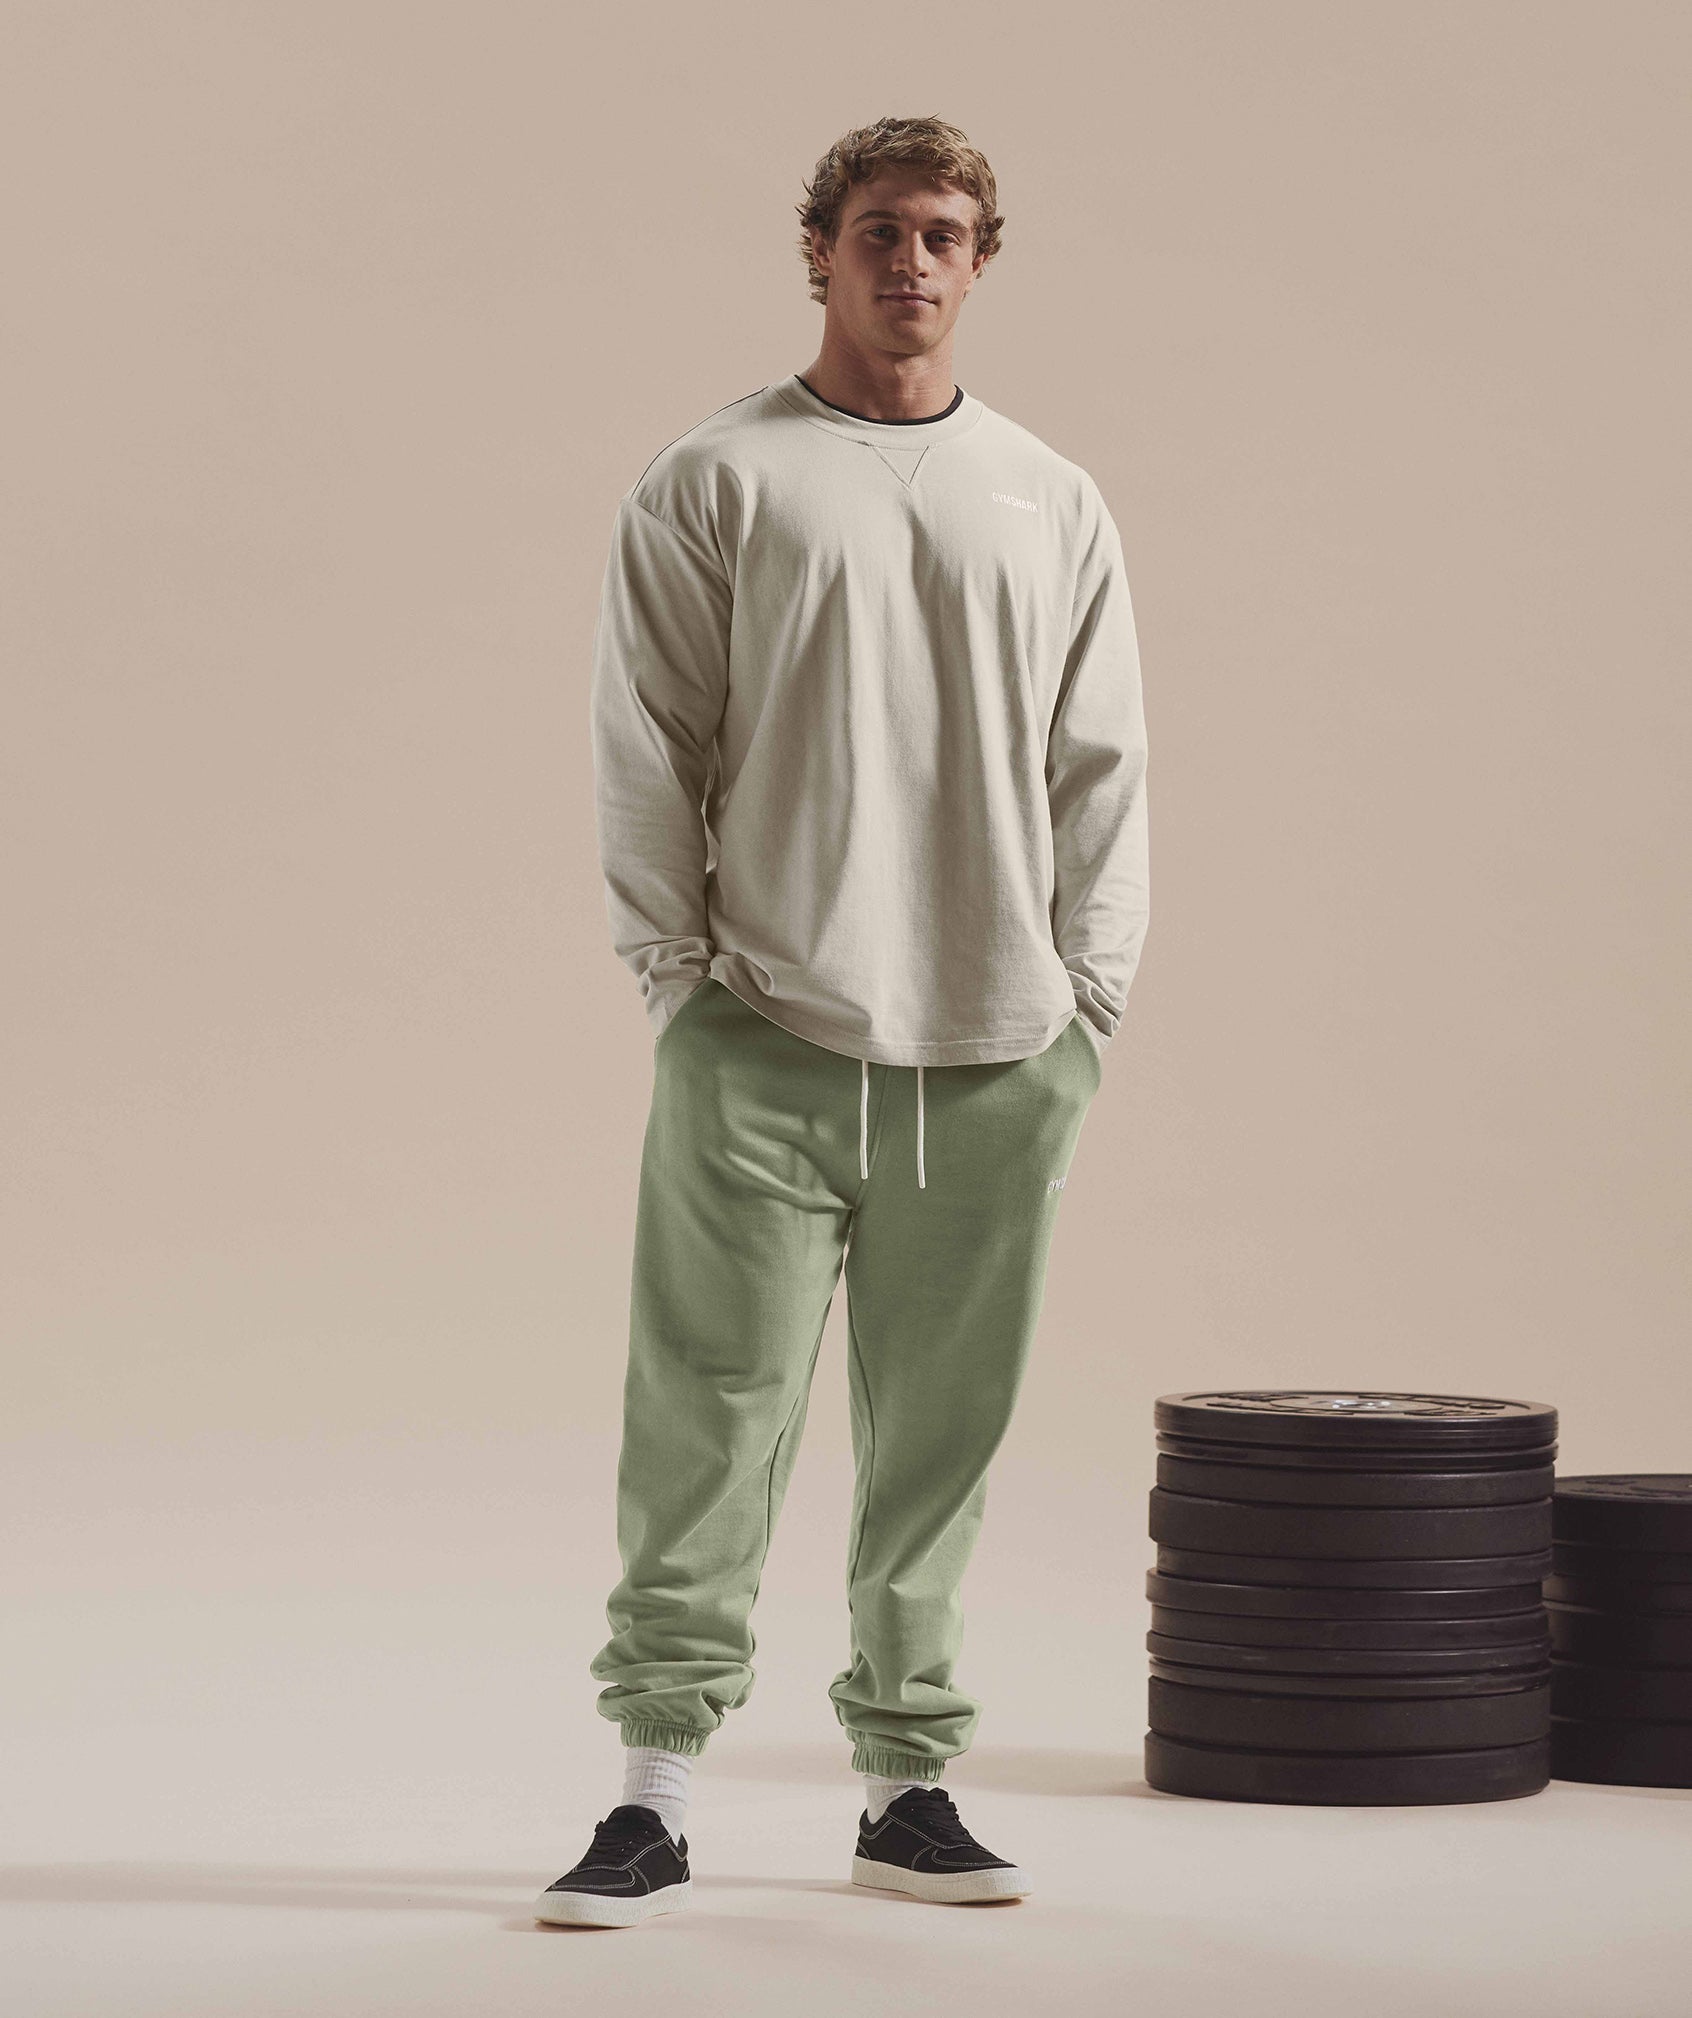 Rest Day Sweats Joggers in Sage Green - view 6